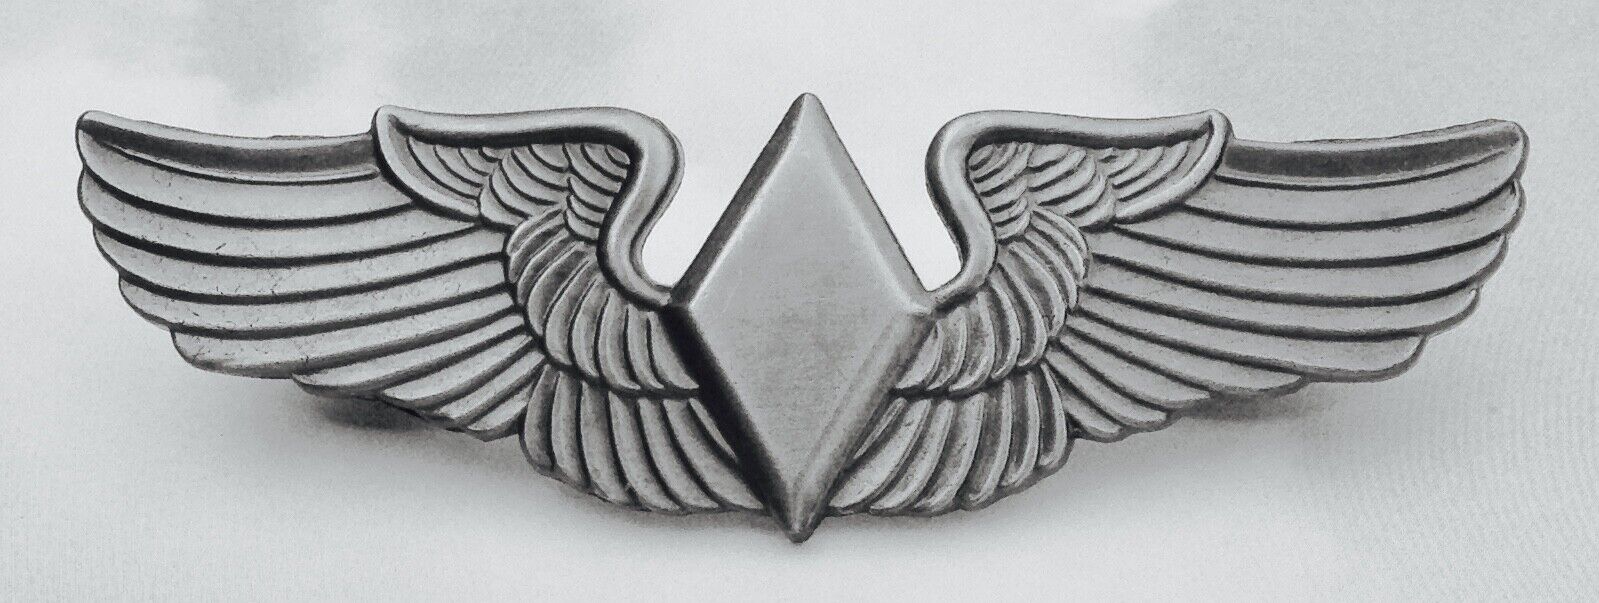 WASP (Woman Airforce Service Pilots) Wings, WWII Vintage Aviation  WIN-0106